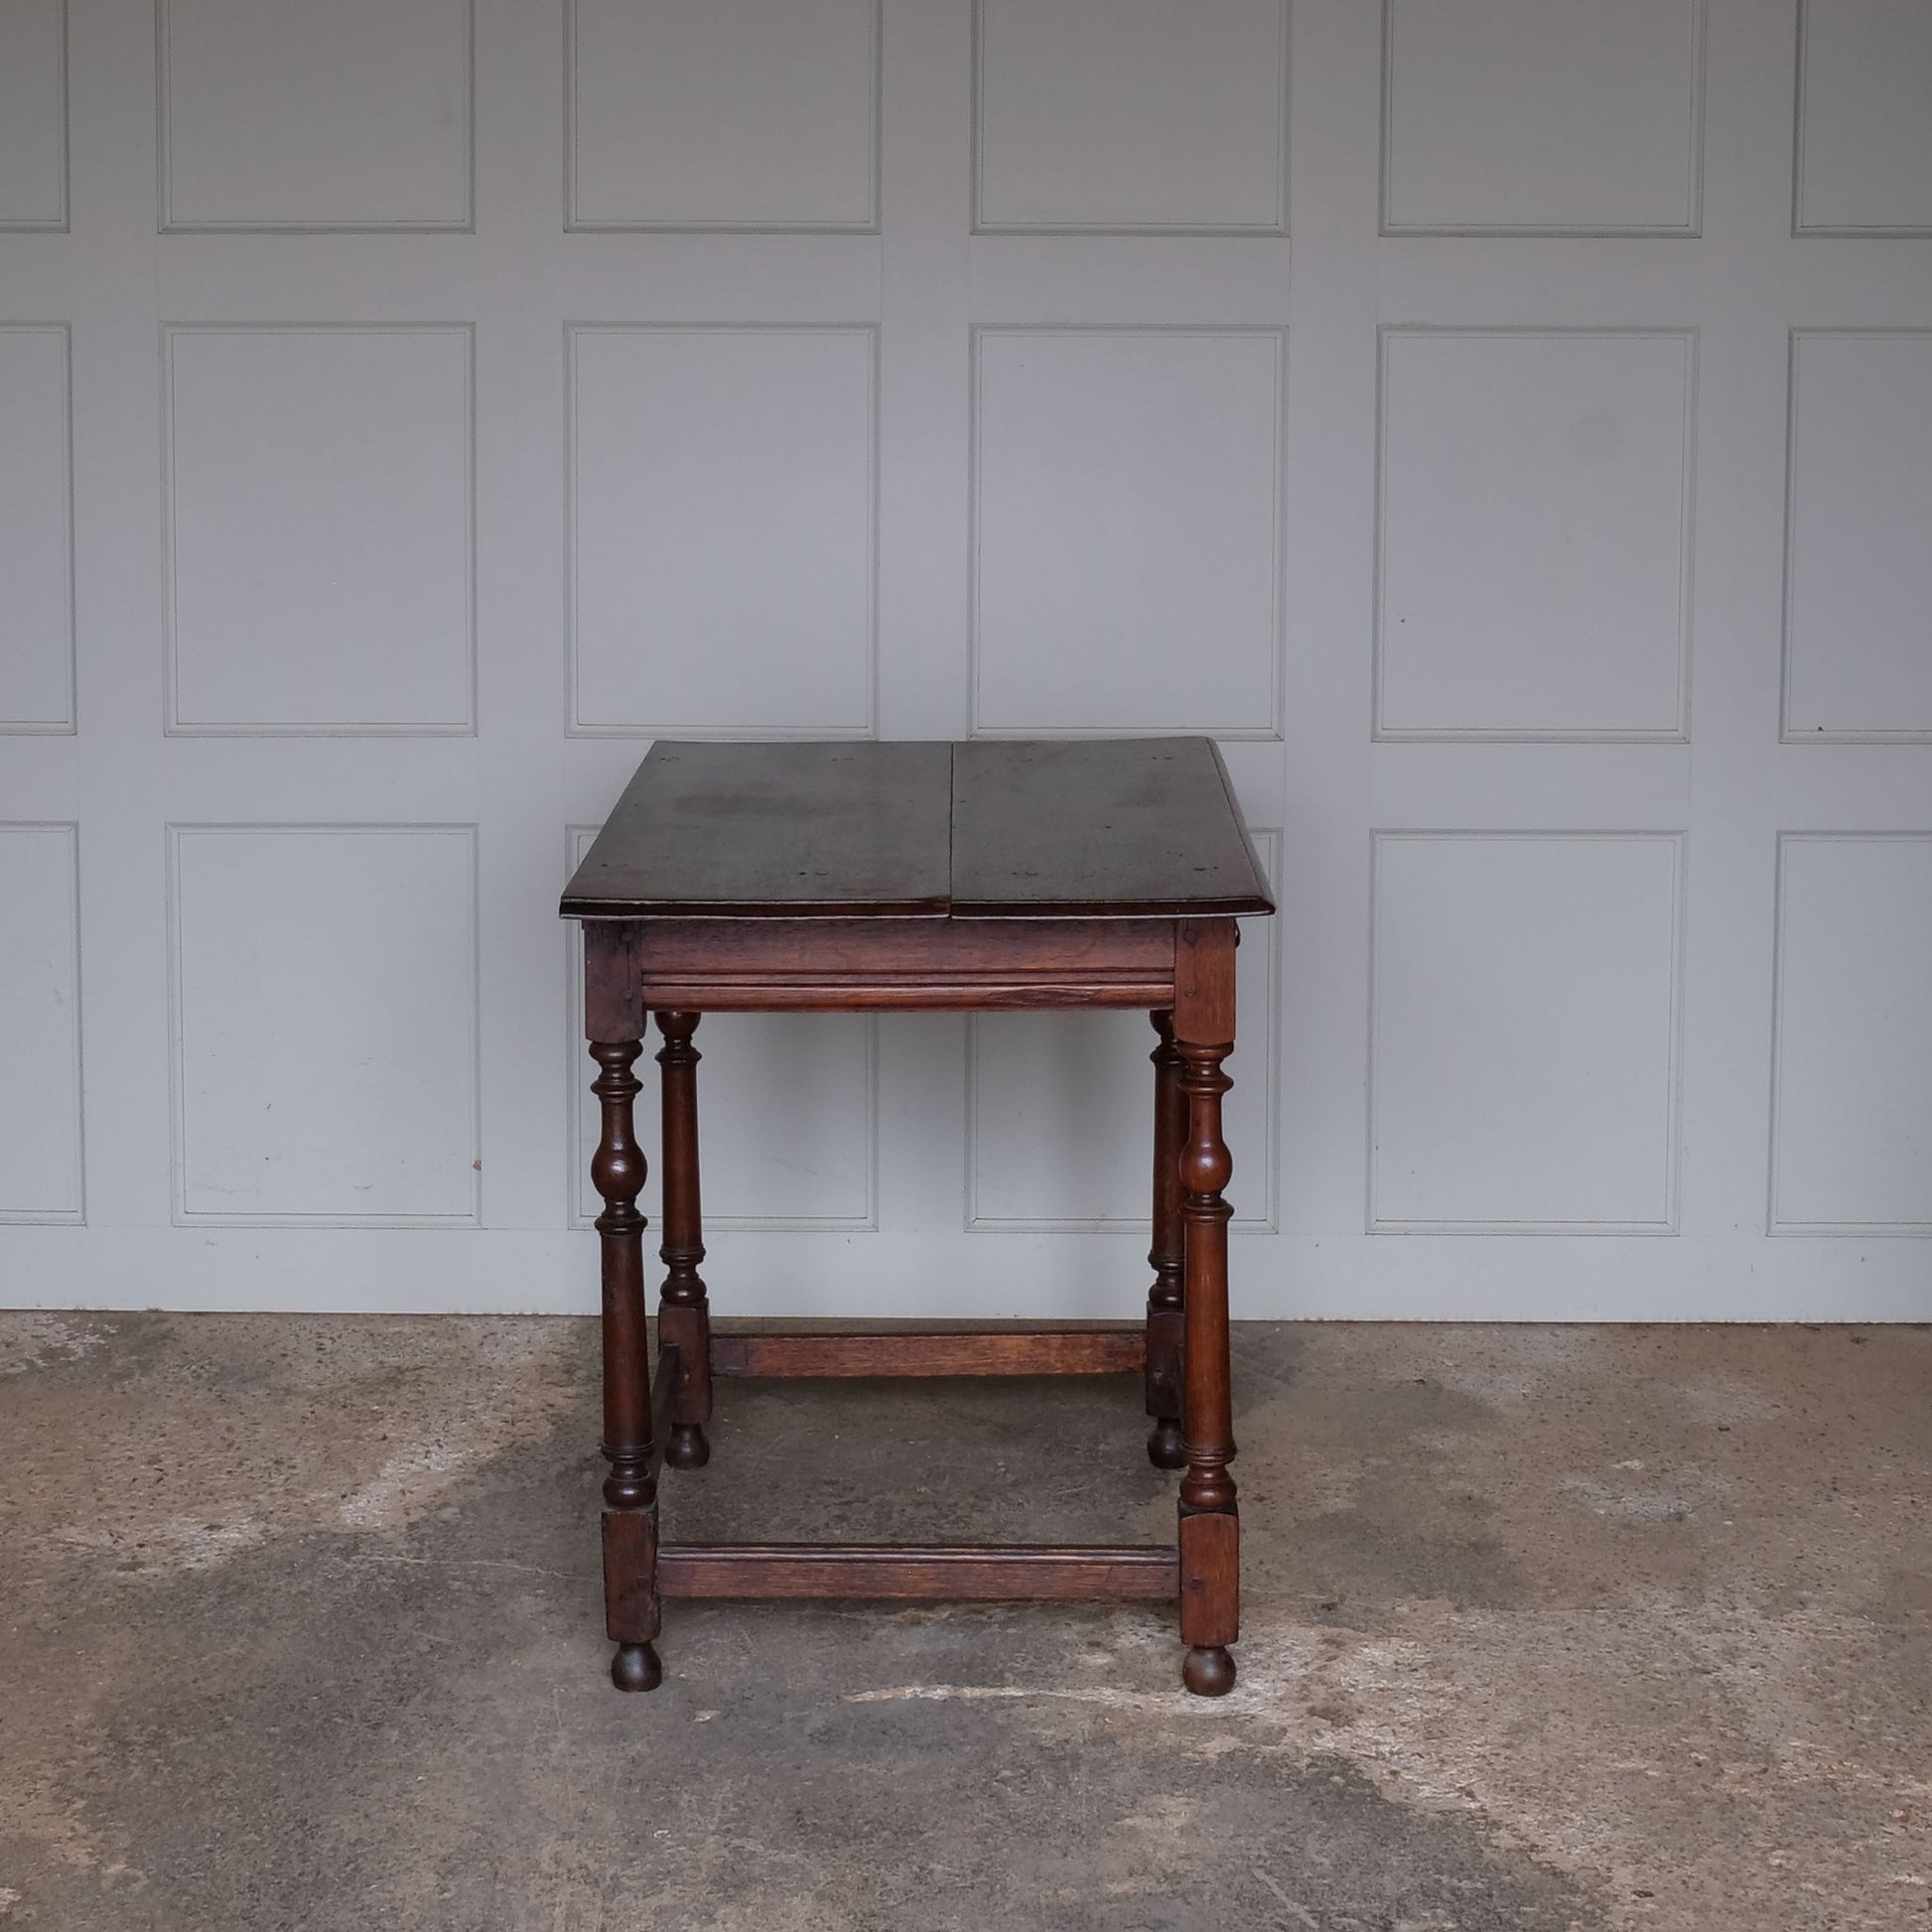 A fine 17th century English oak side table with a lovely well-patinated two plank moulded top with with flying overhangs above a single drawer over tapered and ring-turned legs joined by box stretchers. A very useful size for use in either a living room, small hallway or as an elegant bedside table.